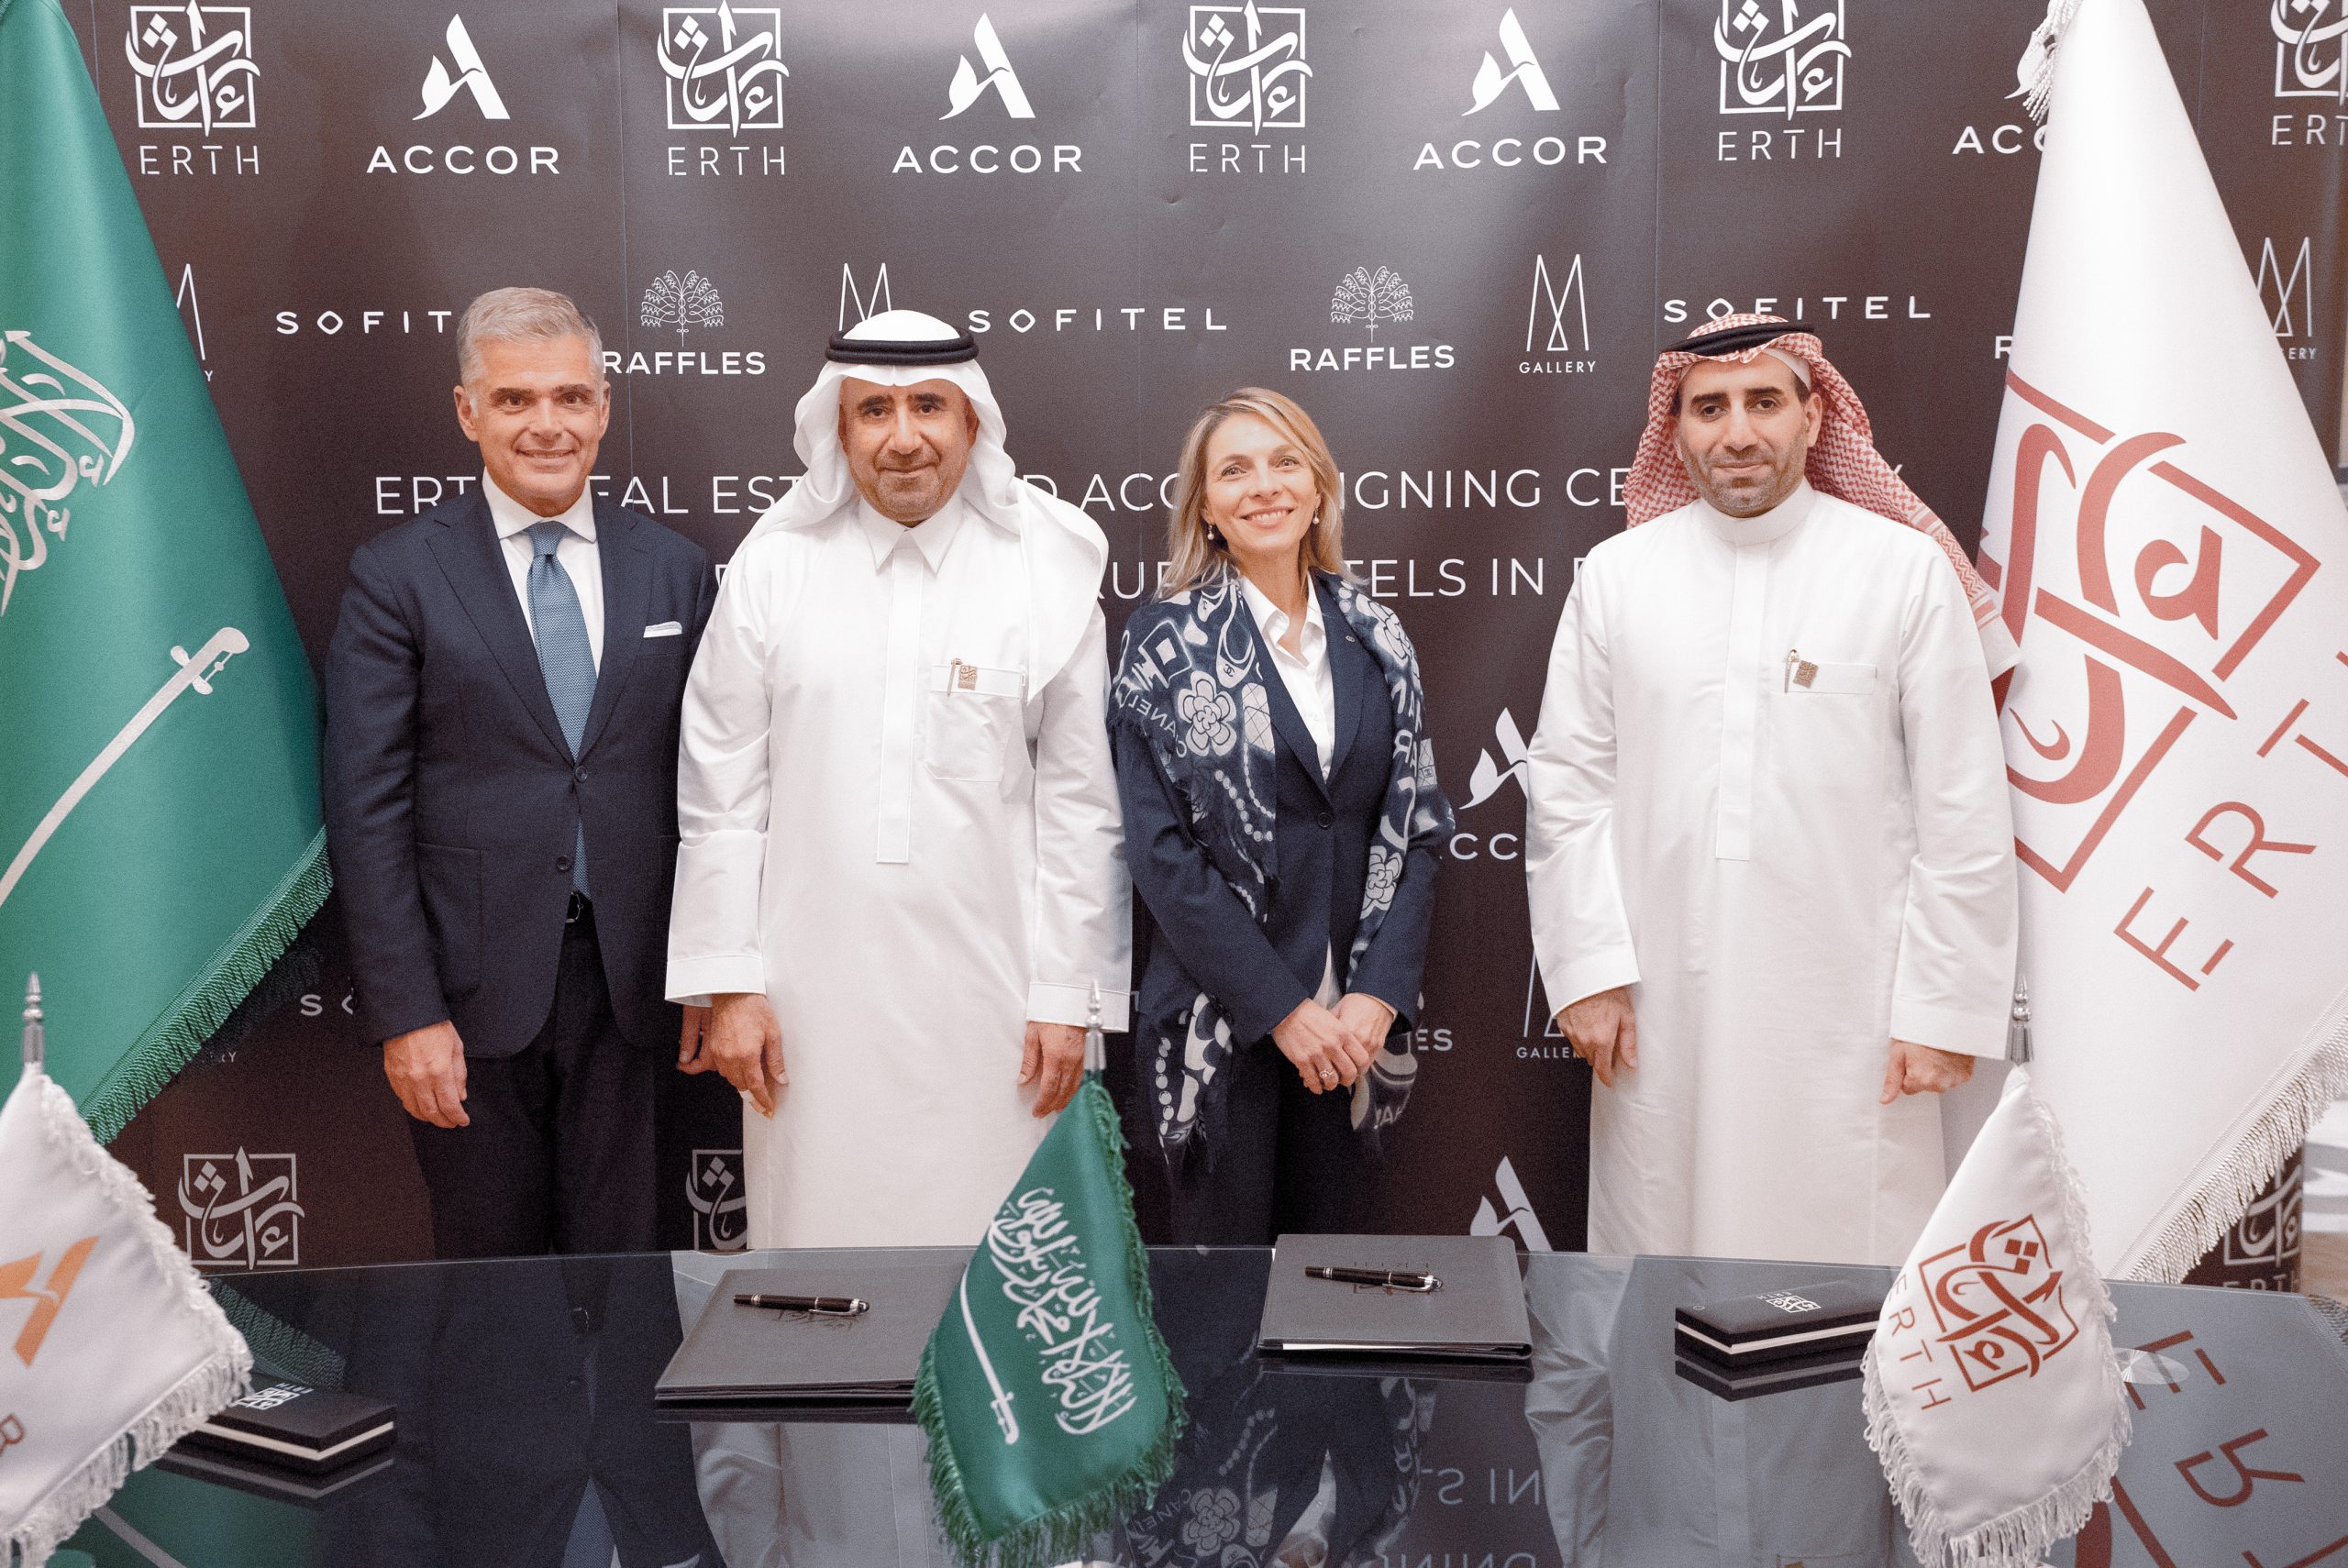 Accor and Erth Real Estate announce three new luxury hotels as centrepiece of multi-branded luxury hospitality community in Riyadh  